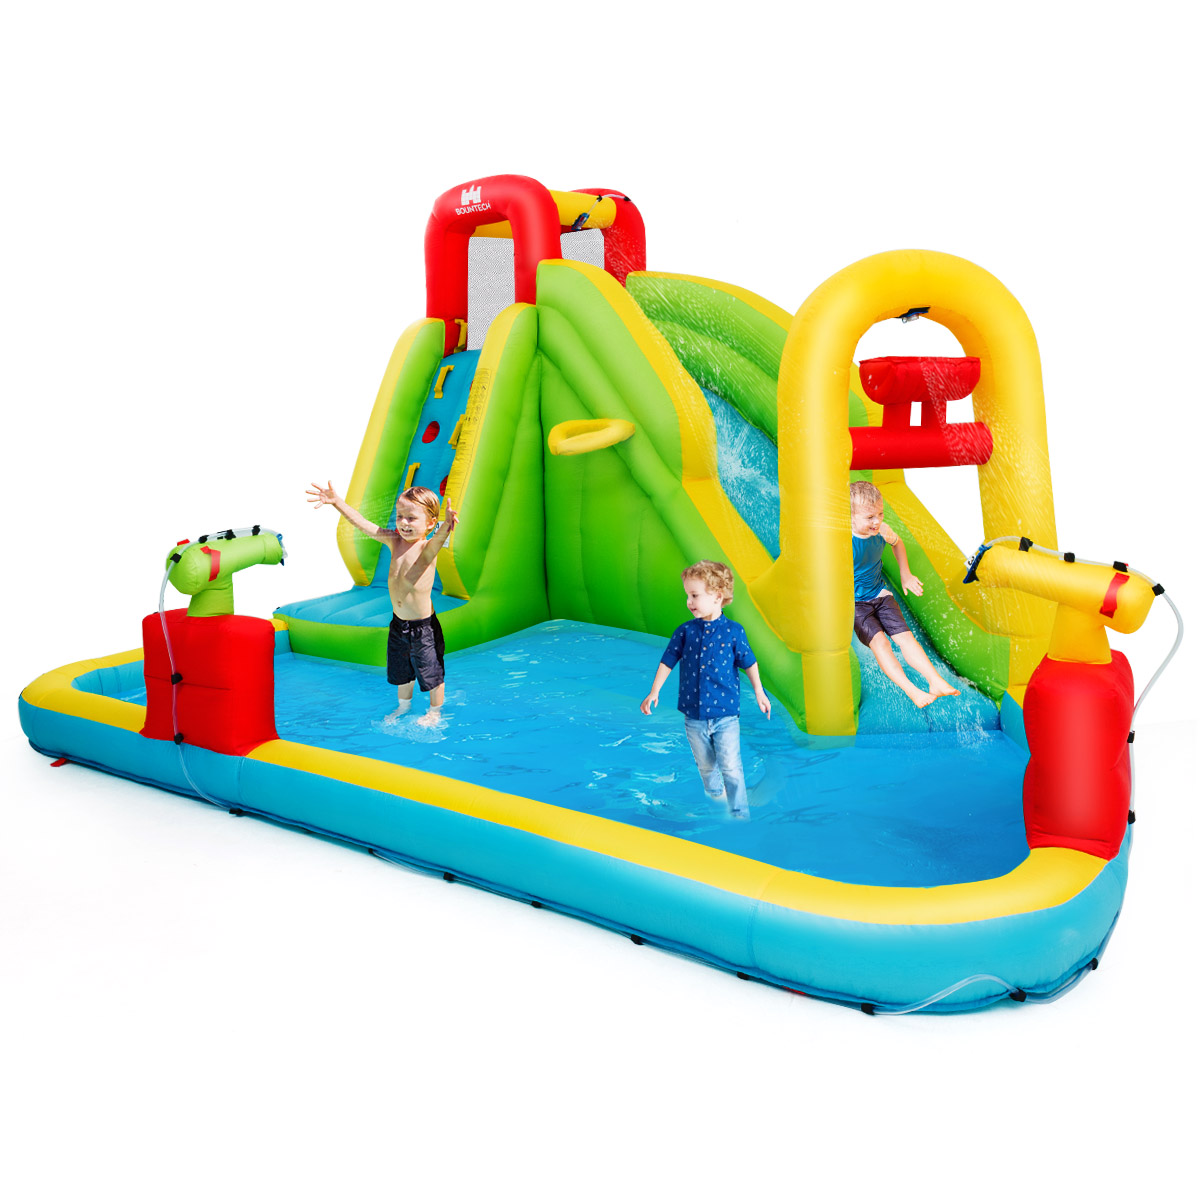 Topbuy Inflatable Splash Water Park Play Bounce House Bounce Slide Climbing Wall Without Blower